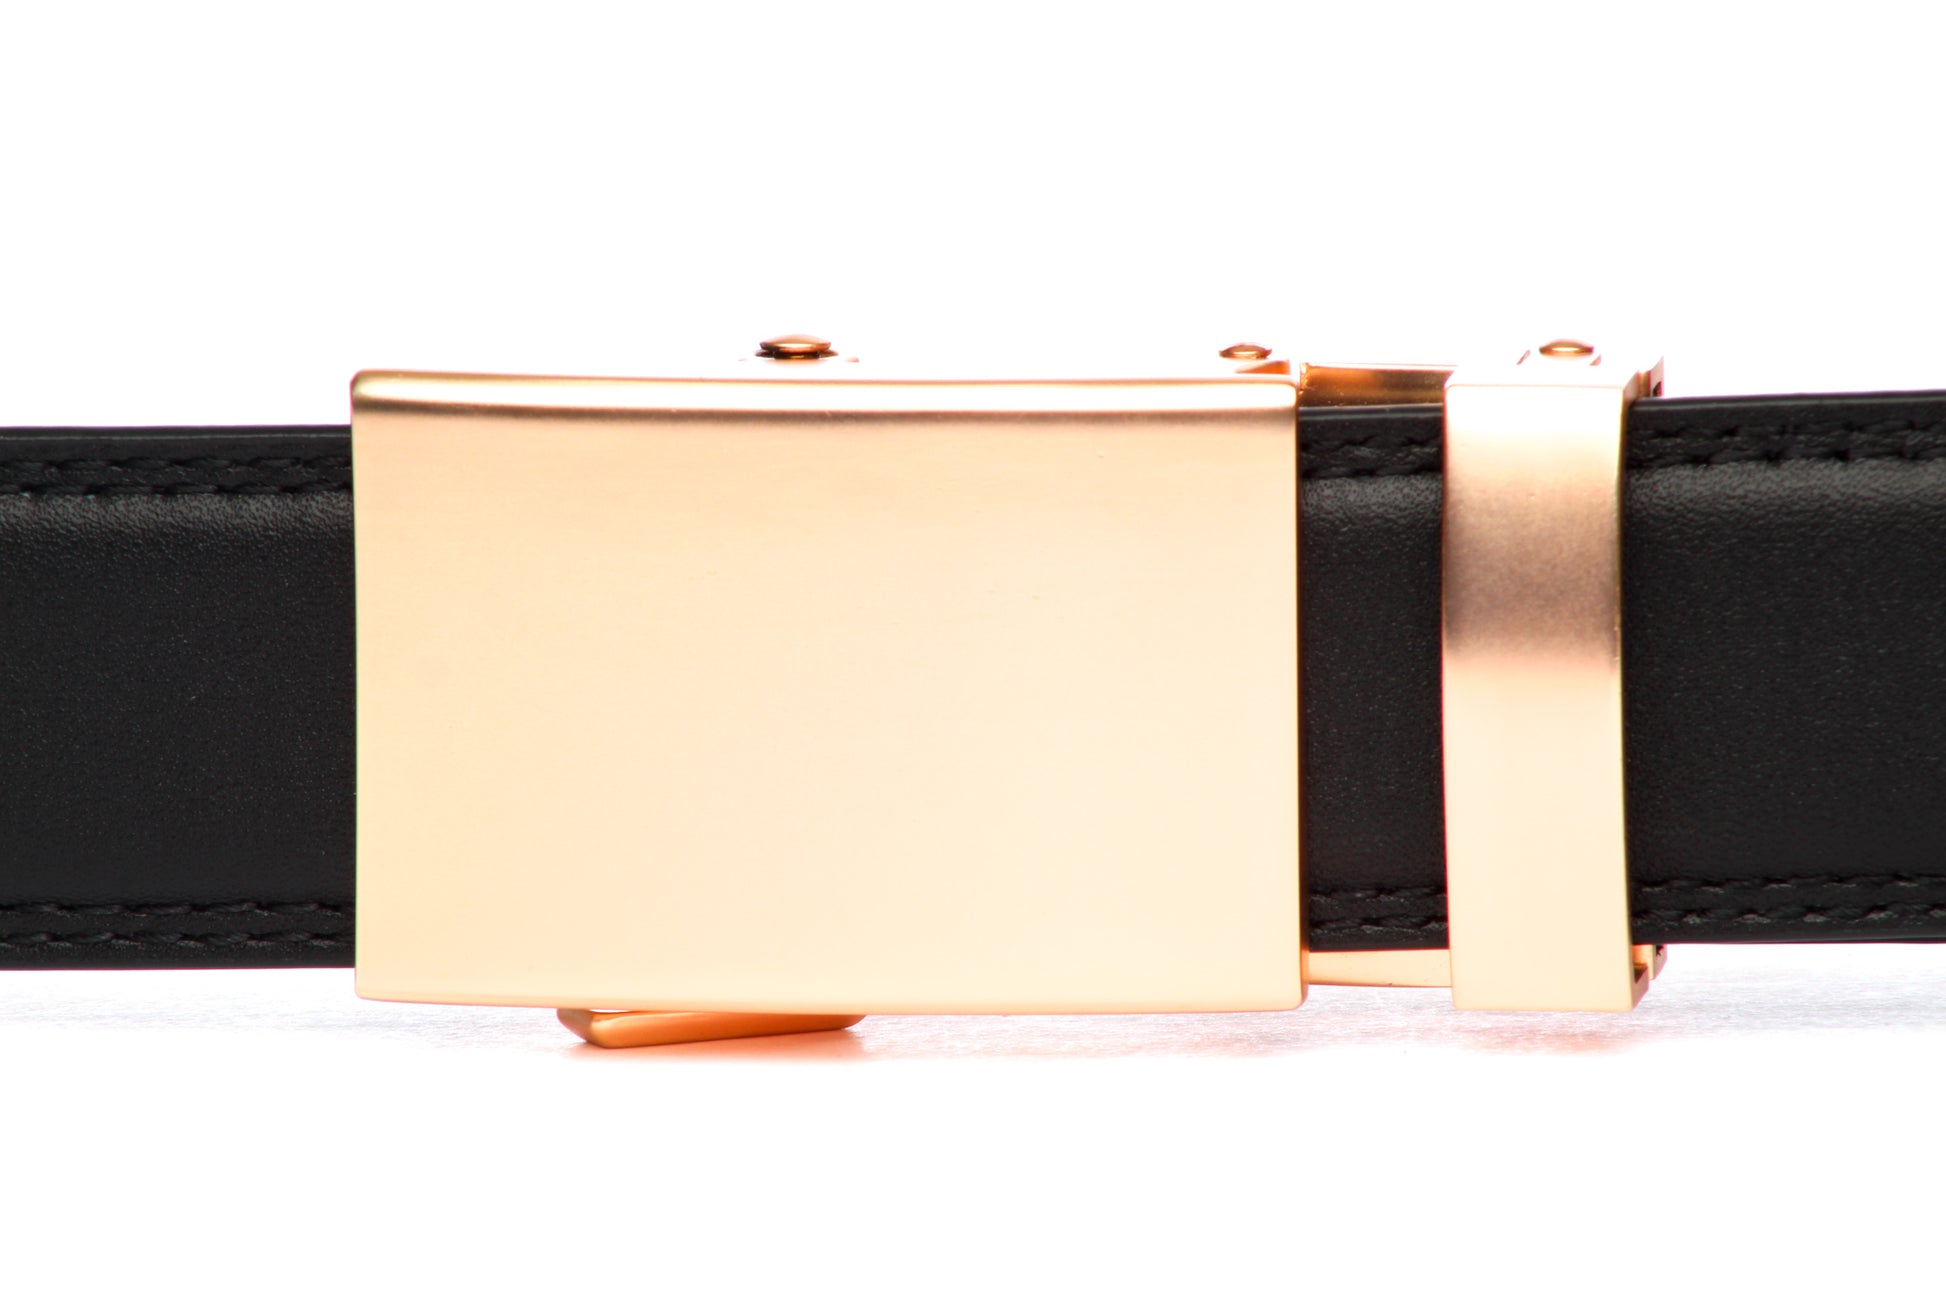 Men's classic ratchet belt buckle in rose gold with a 1.25-inch width, front view.